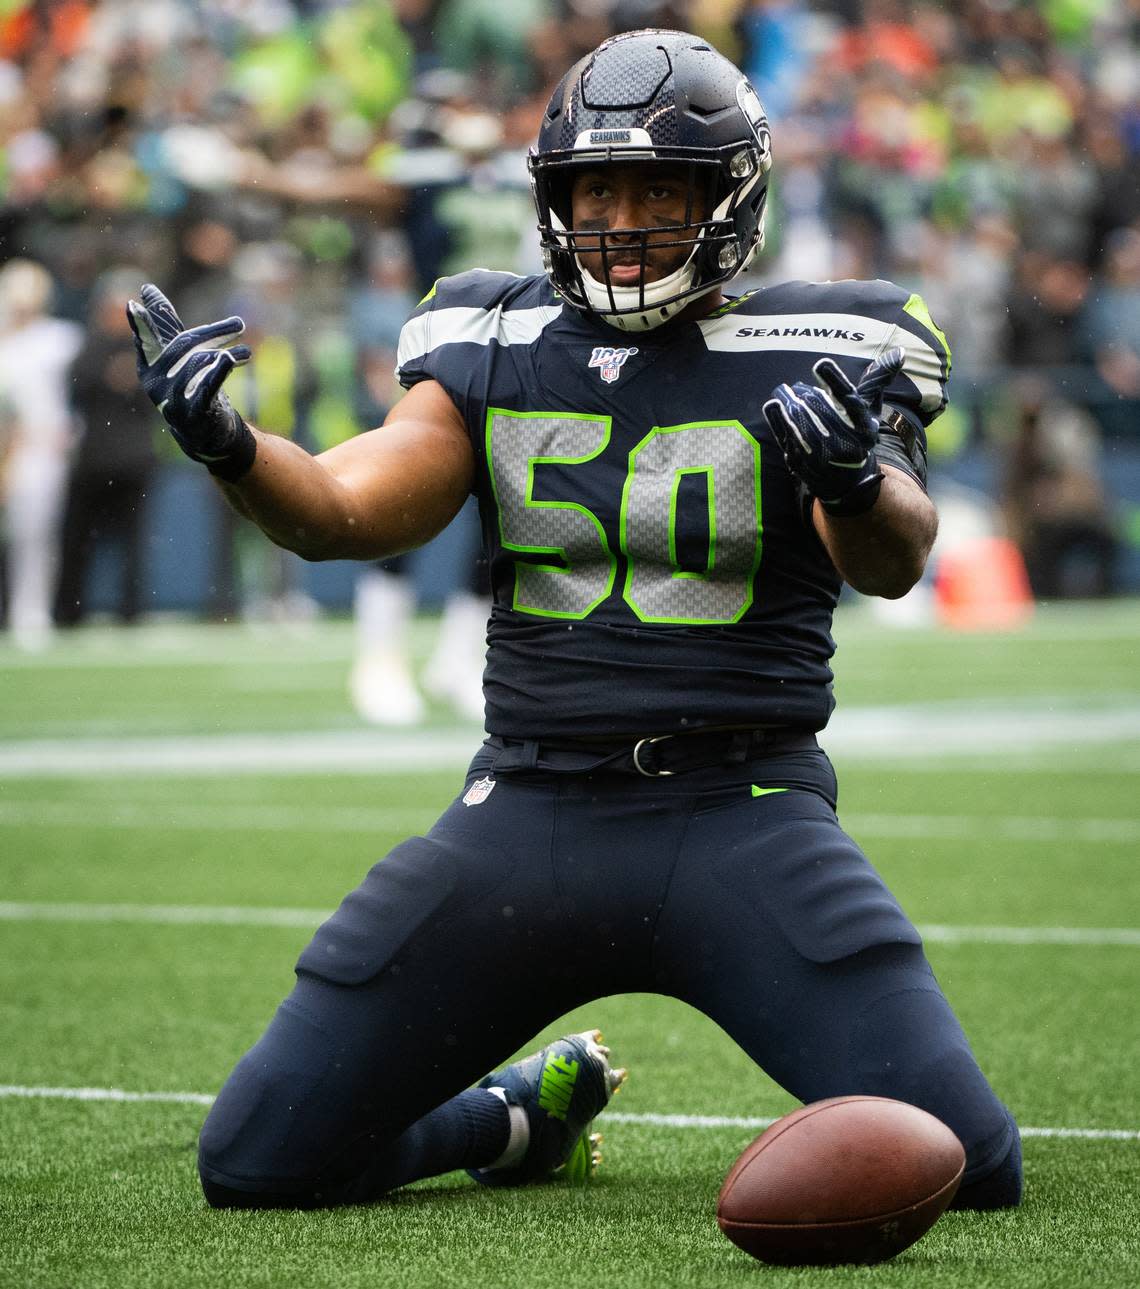 Seattle Seahawks outside linebacker K.J. Wright (50) celebrates batting down a pass during the fourth quarter. The Seattle Seahawks played the New Orleans Saints in a NFL football game at CenturyLink Field in Seattle, Wash., on Saturday, Sept. 21, 2019.